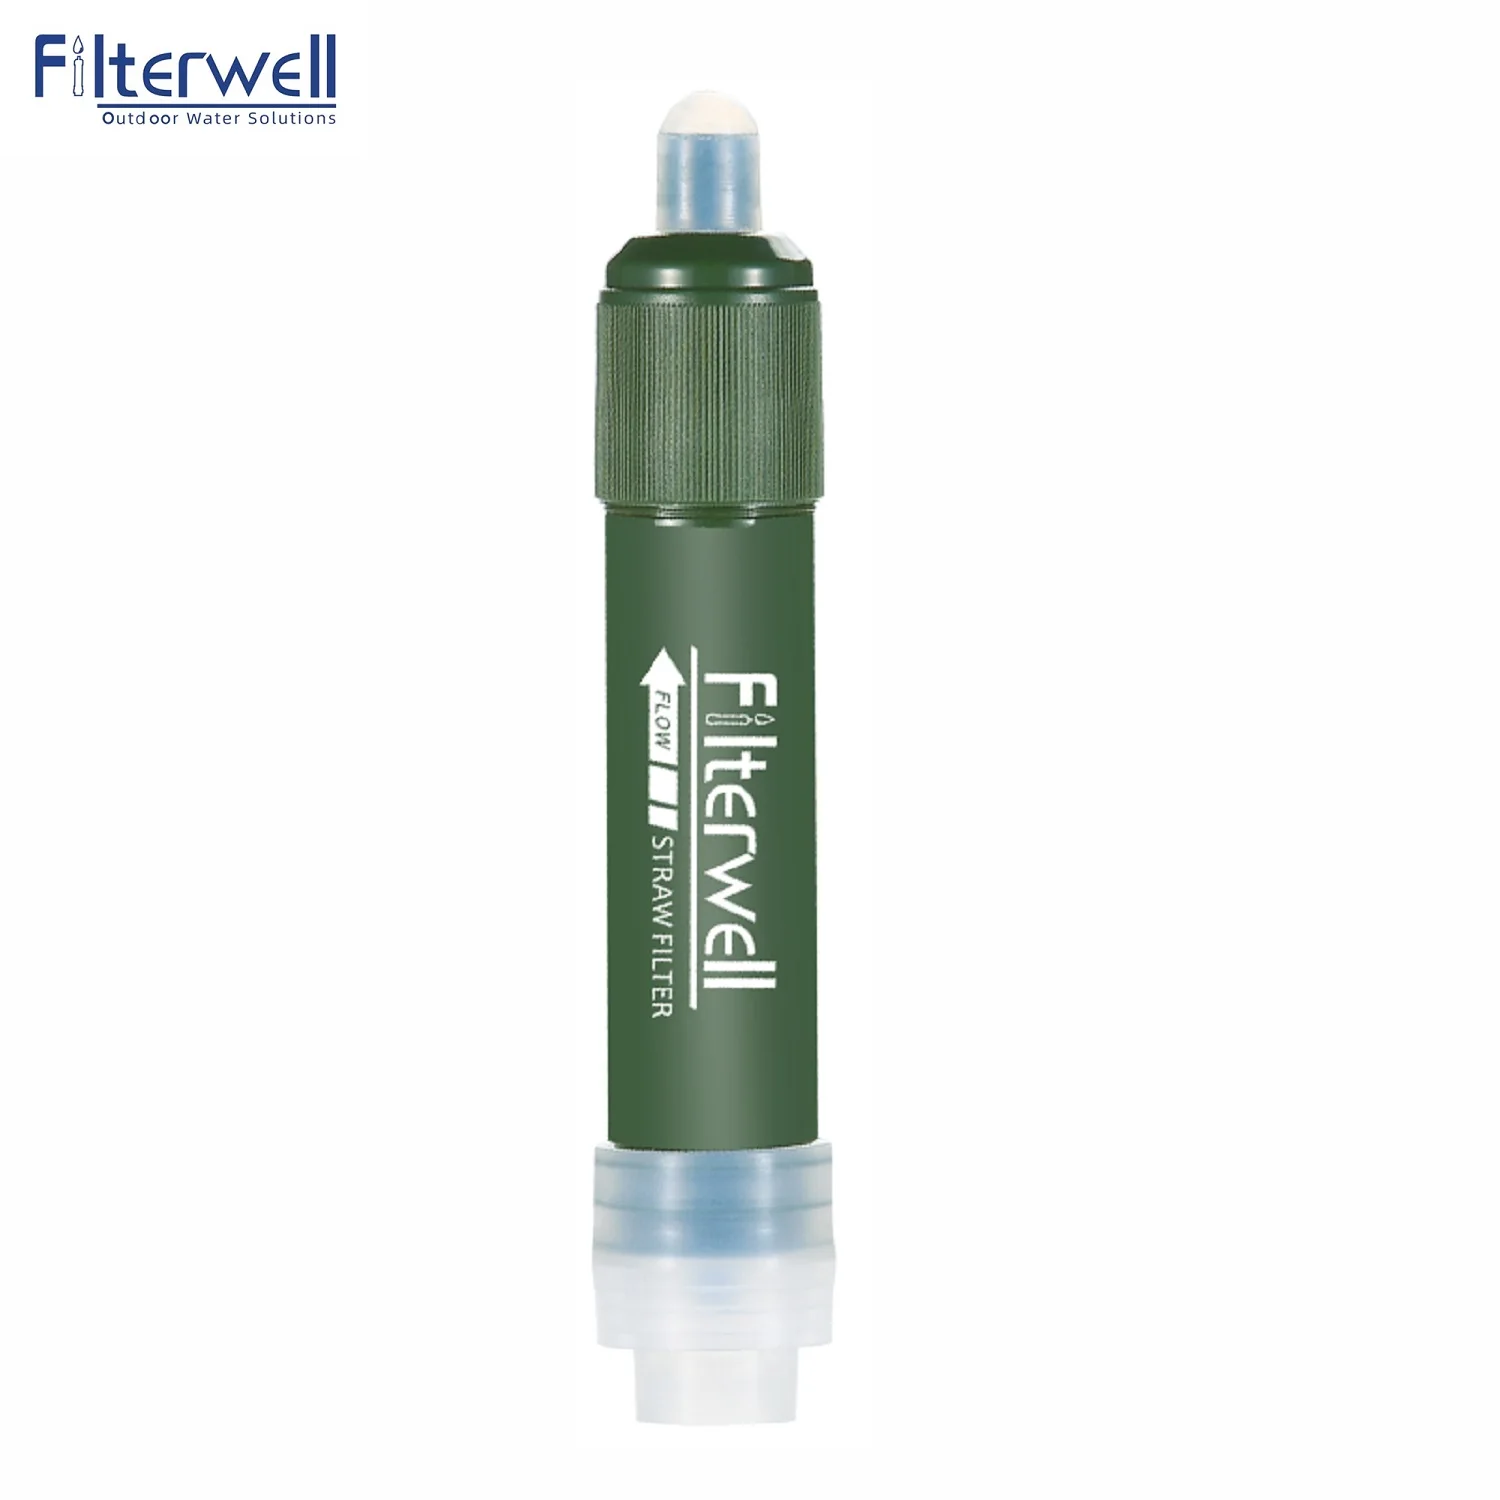 Filterwell Portable camping mini portable personal Life water filtration filter  straw (1600128758923)